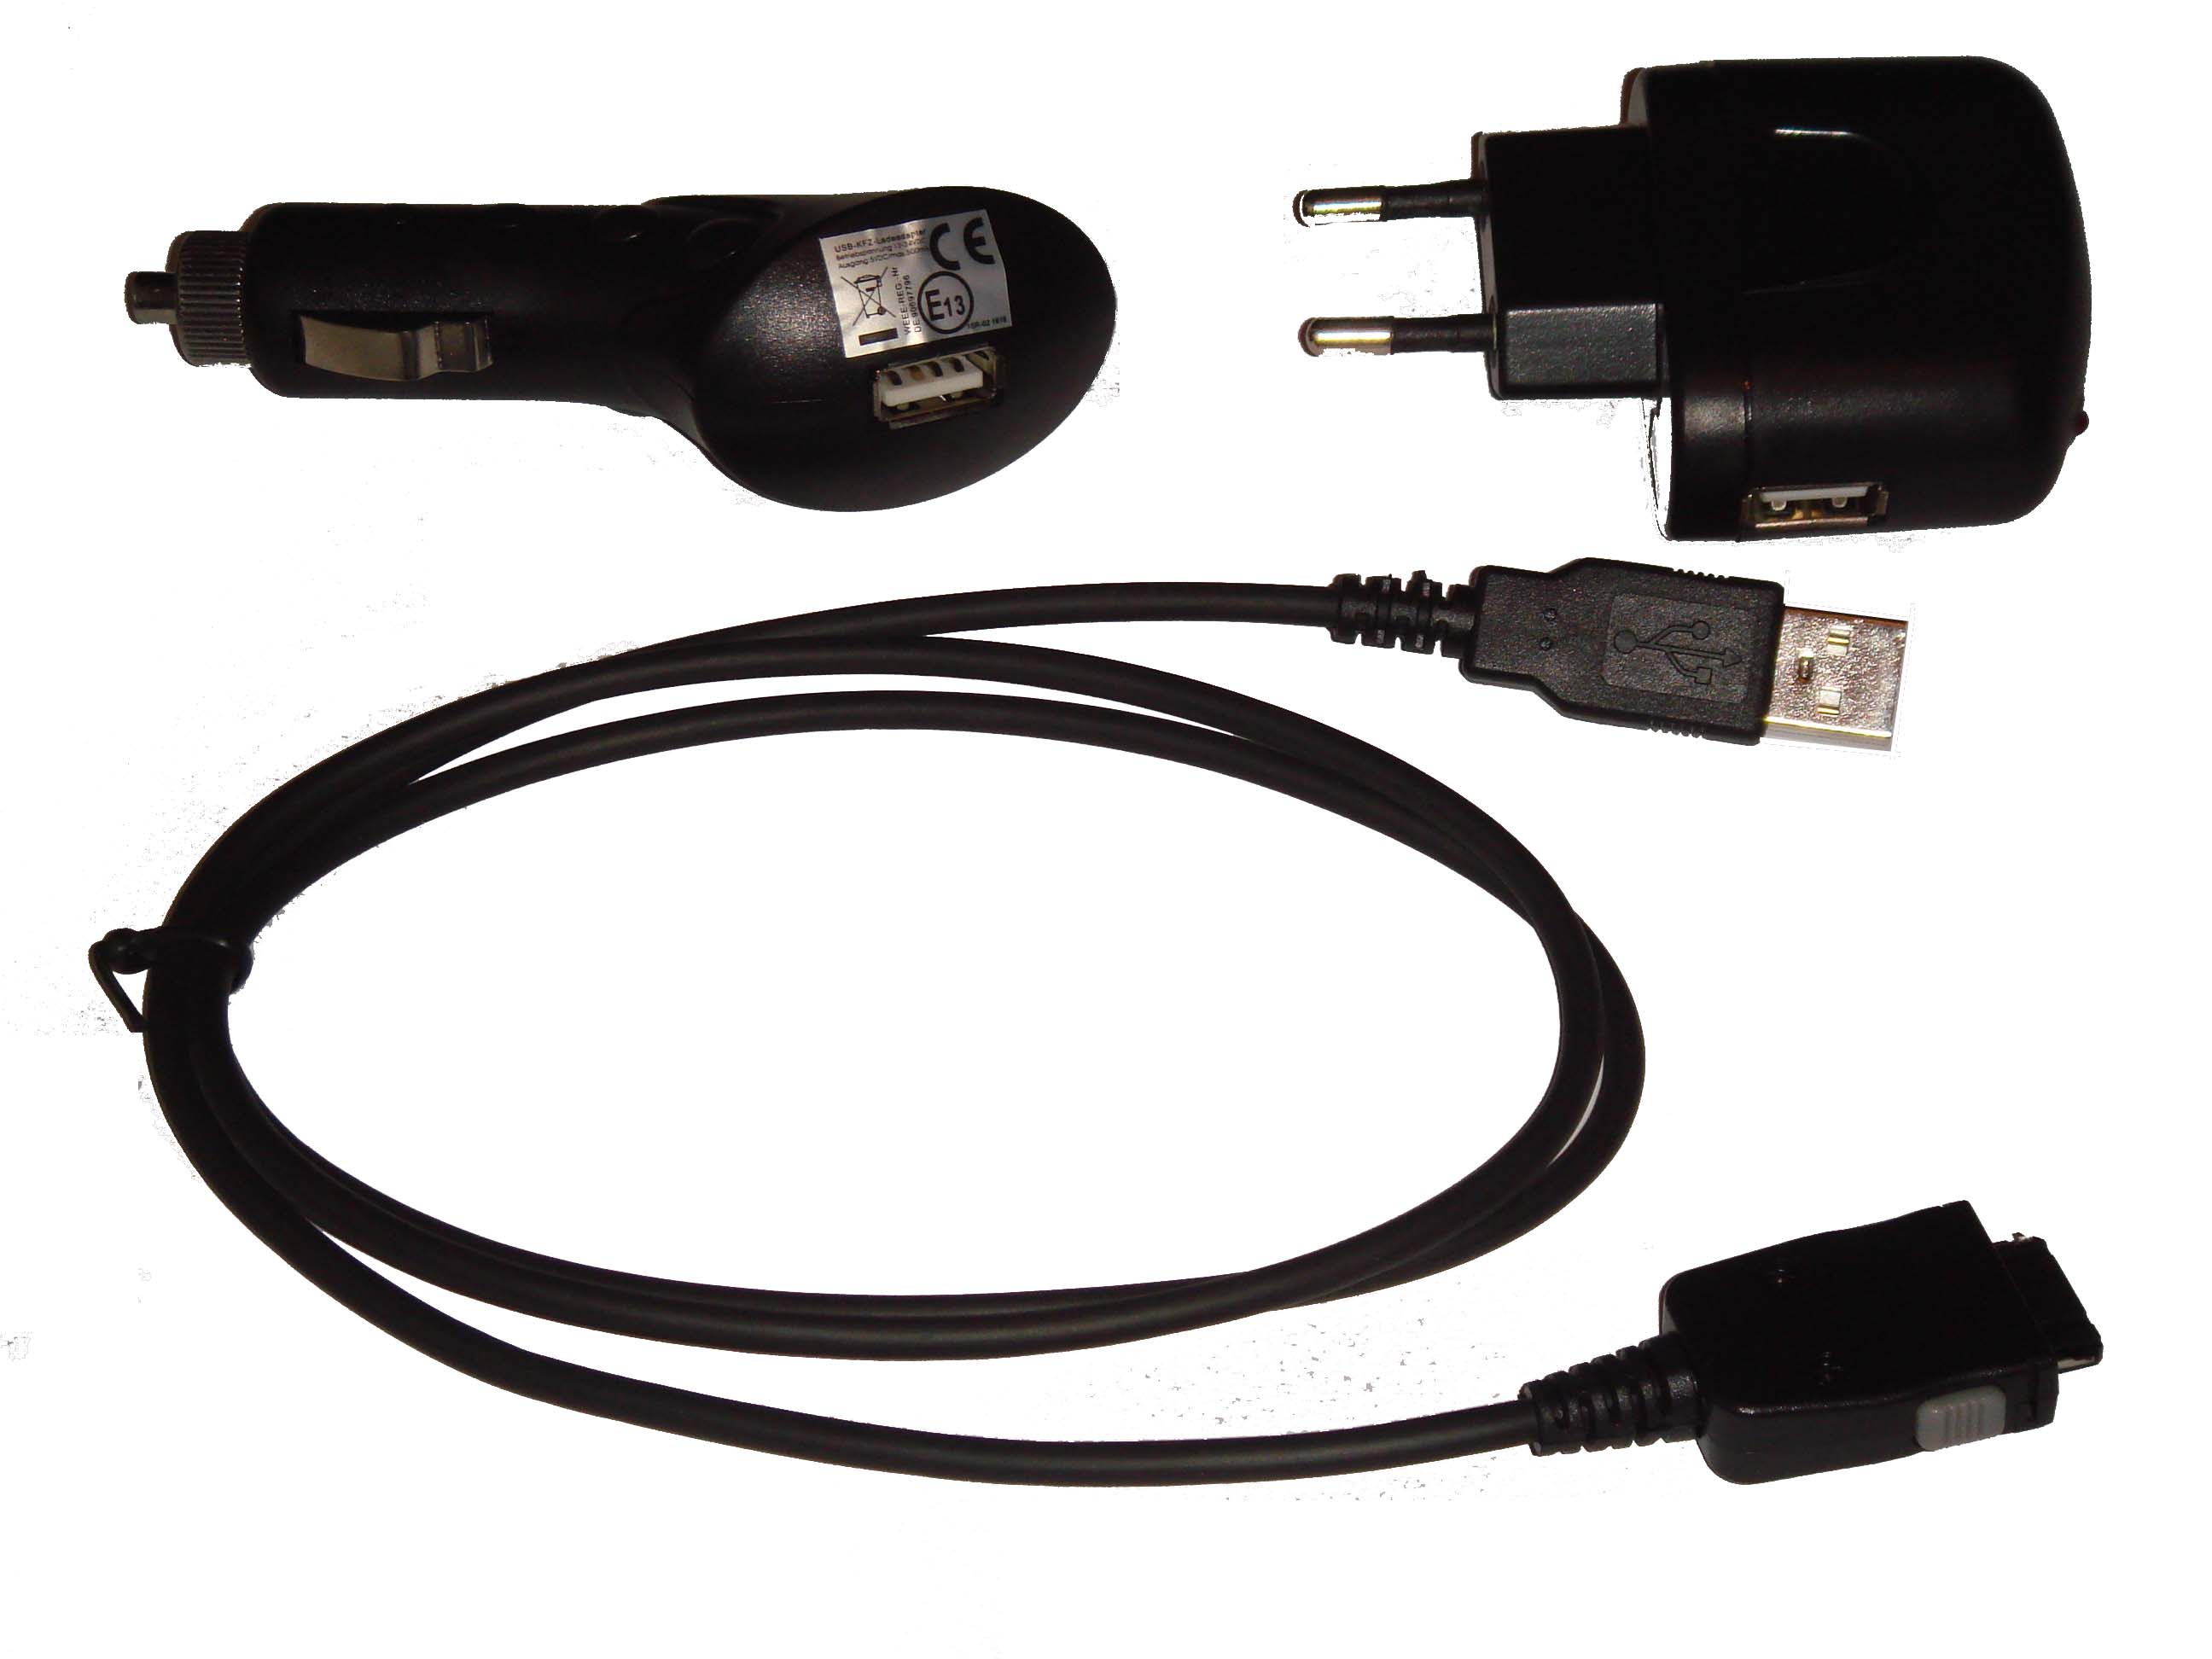 Charger Set suitable for Yakumo Delta X Sat-Nav - In-Car/Mains Charger Adapter, 2-in-1 USB-Cable